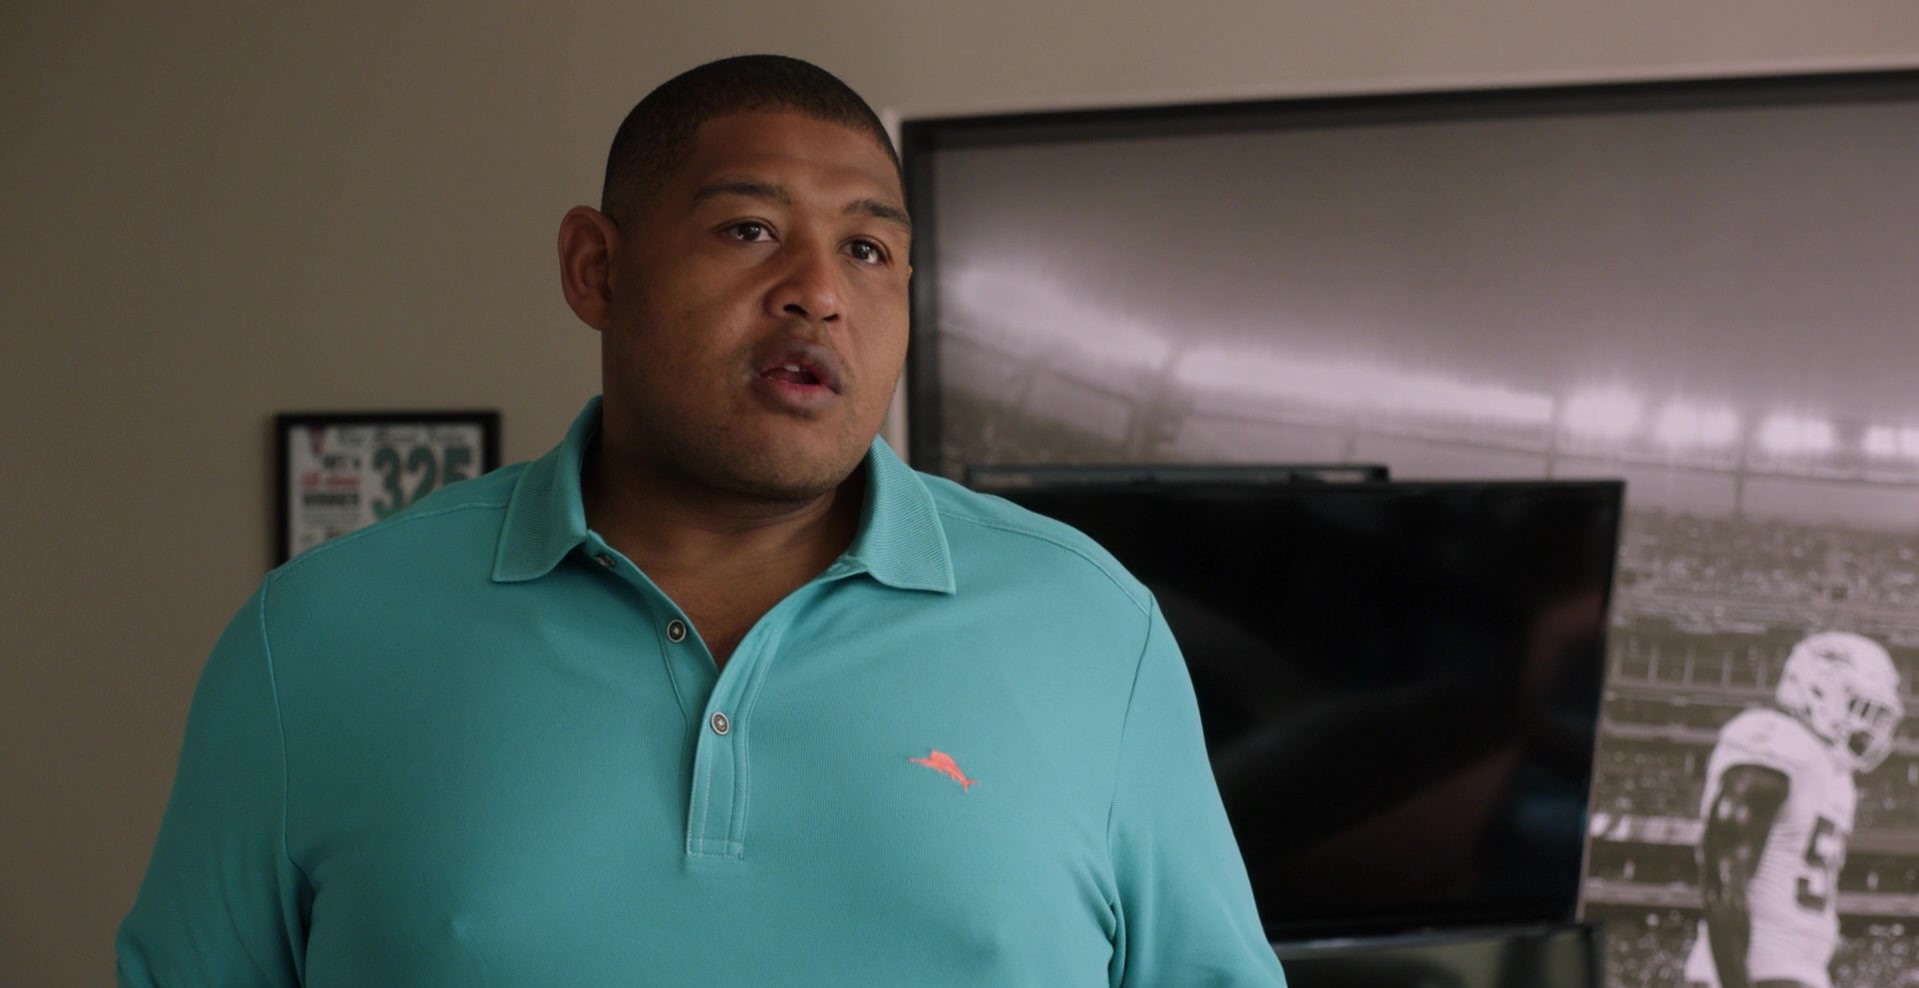 Ballers: Is Charles Greane Based on a Real NFL Player?